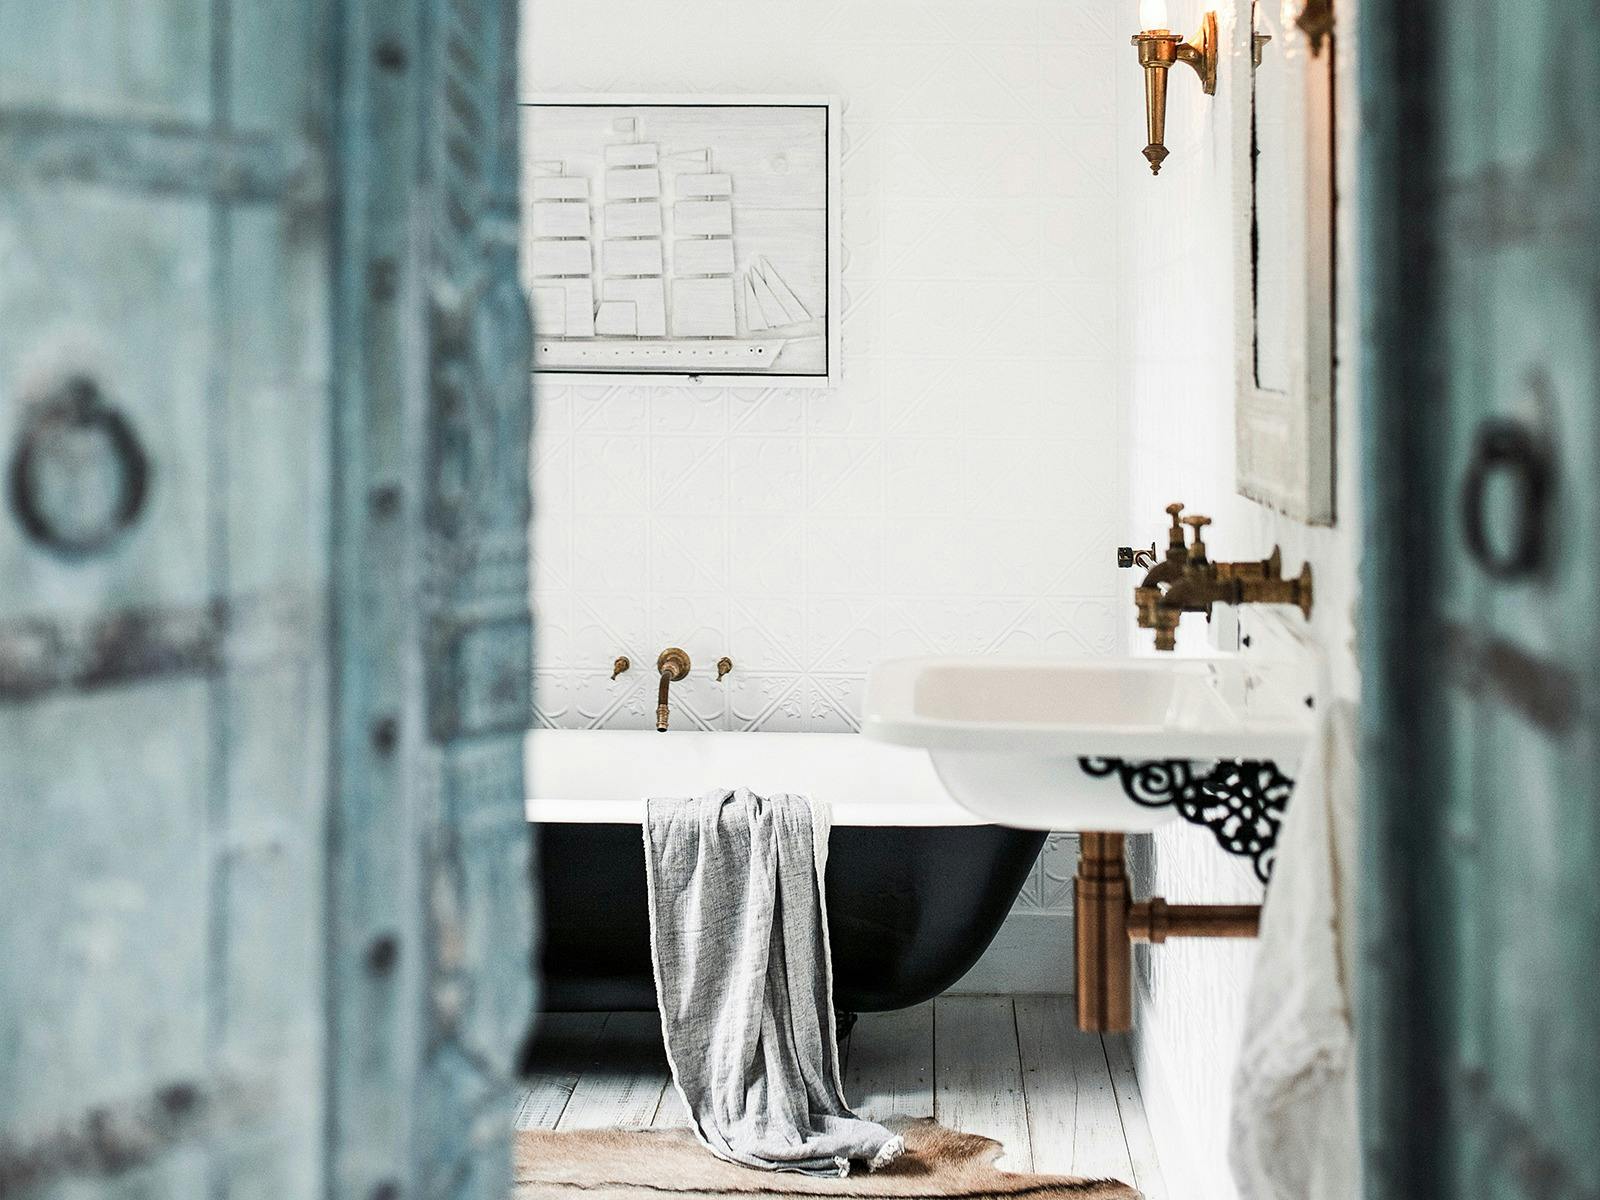 Blue wooden doors lead into the bathroom with a black claw foot bath tub, white wall, gold detailsi